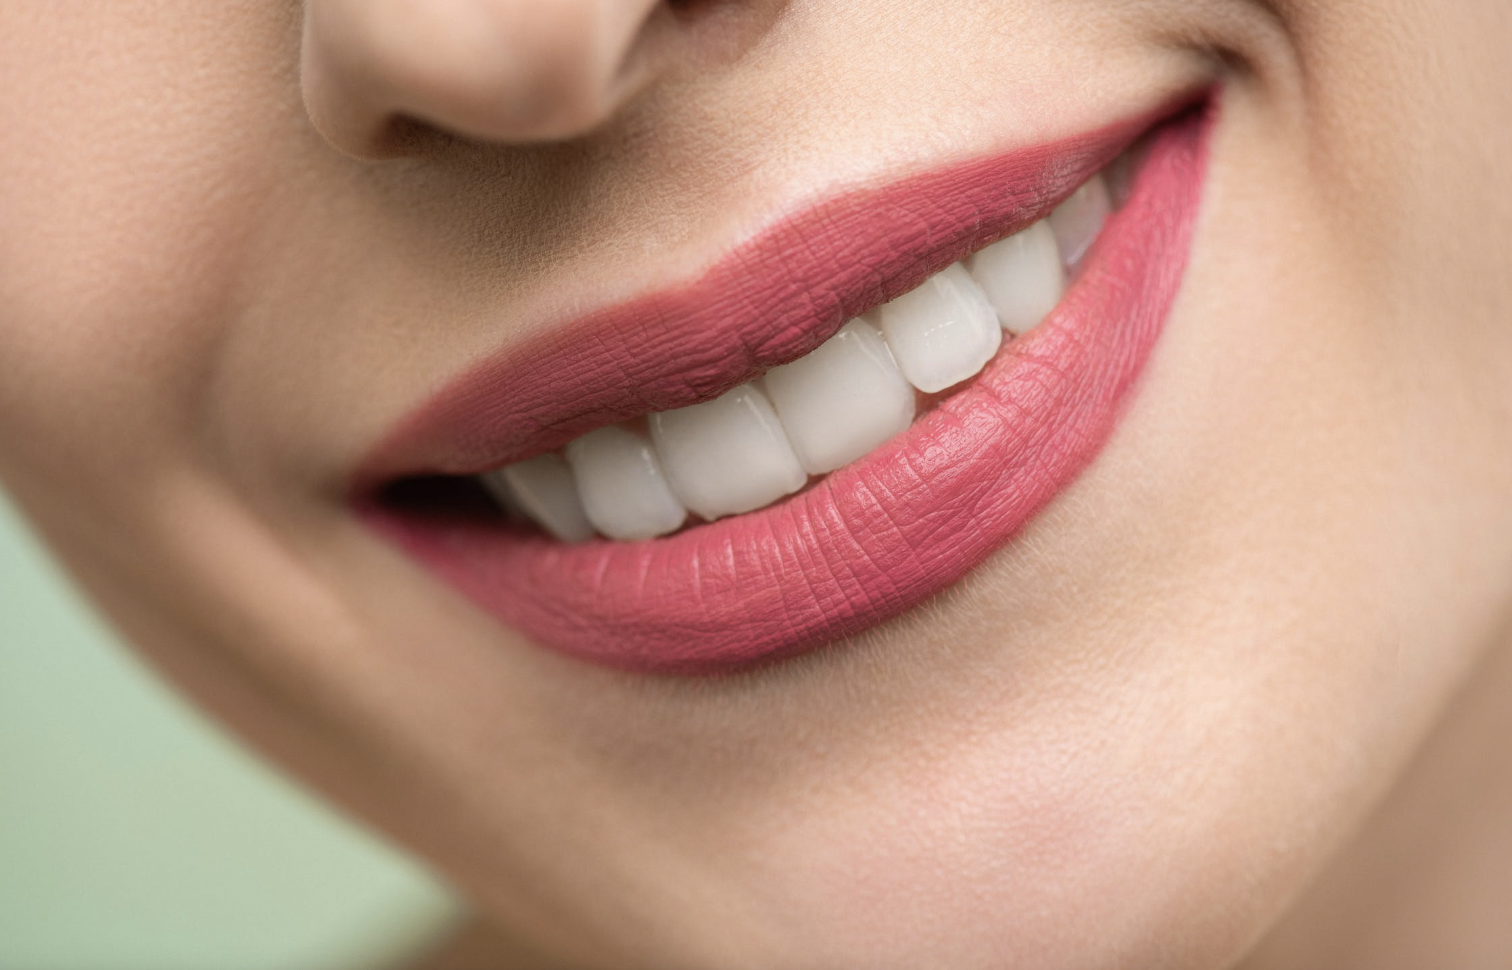 woman smiling with pink lipstick and teeth showing